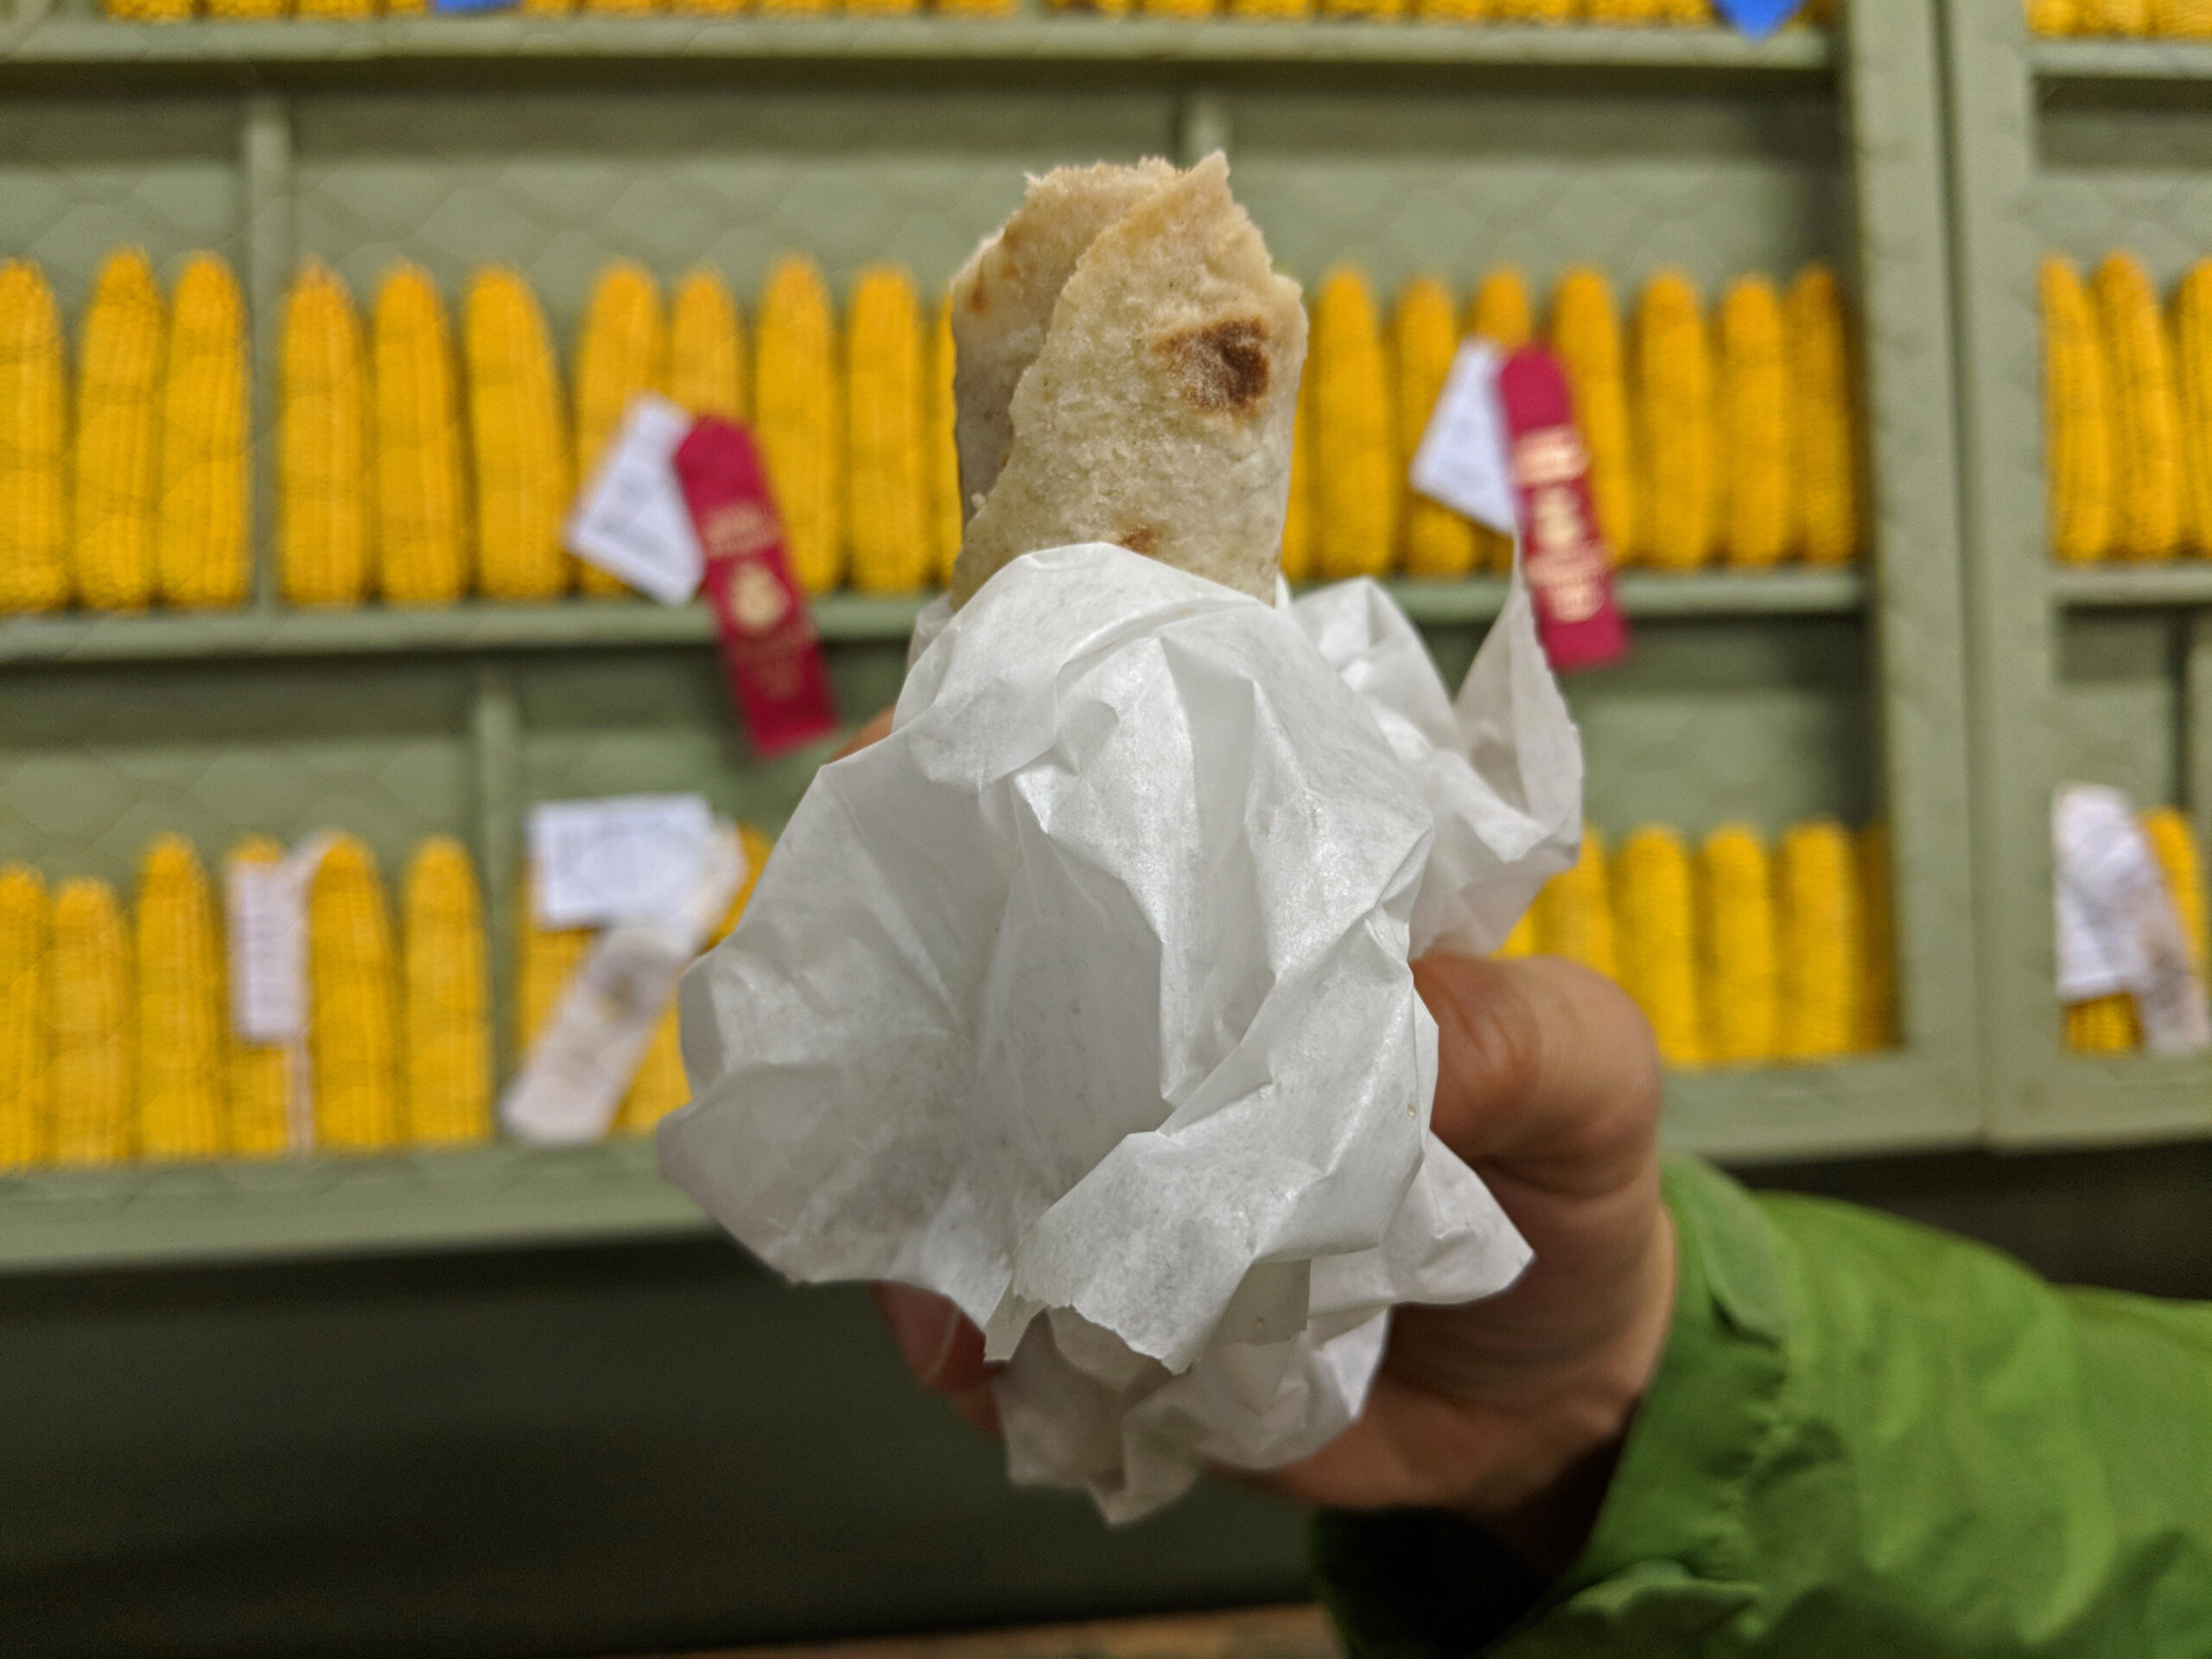 Lefse in hand with seed corn display in background